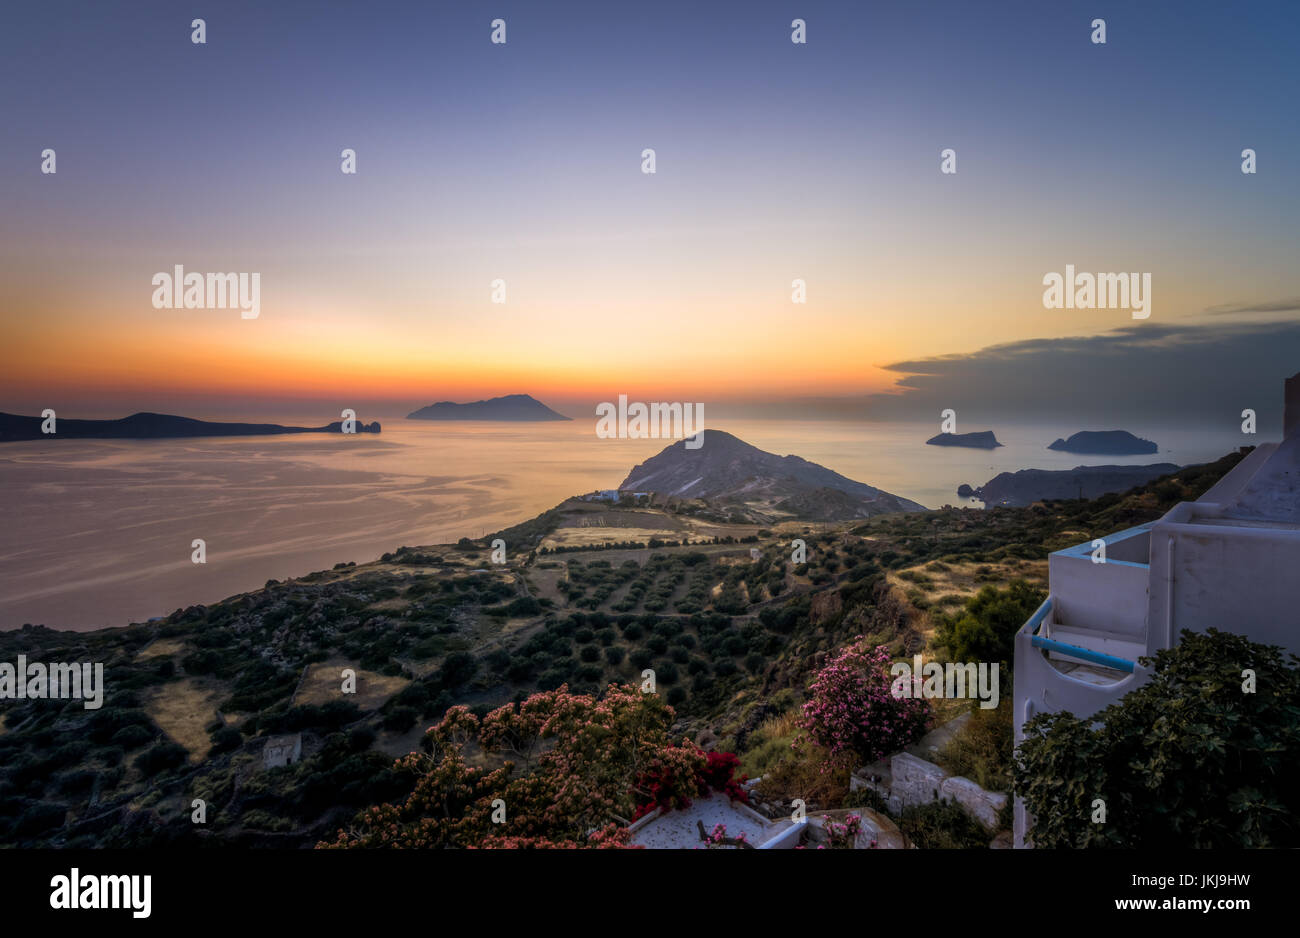 Scenic sunset as seen from Plaka town in Milos island, Greece Stock Photo